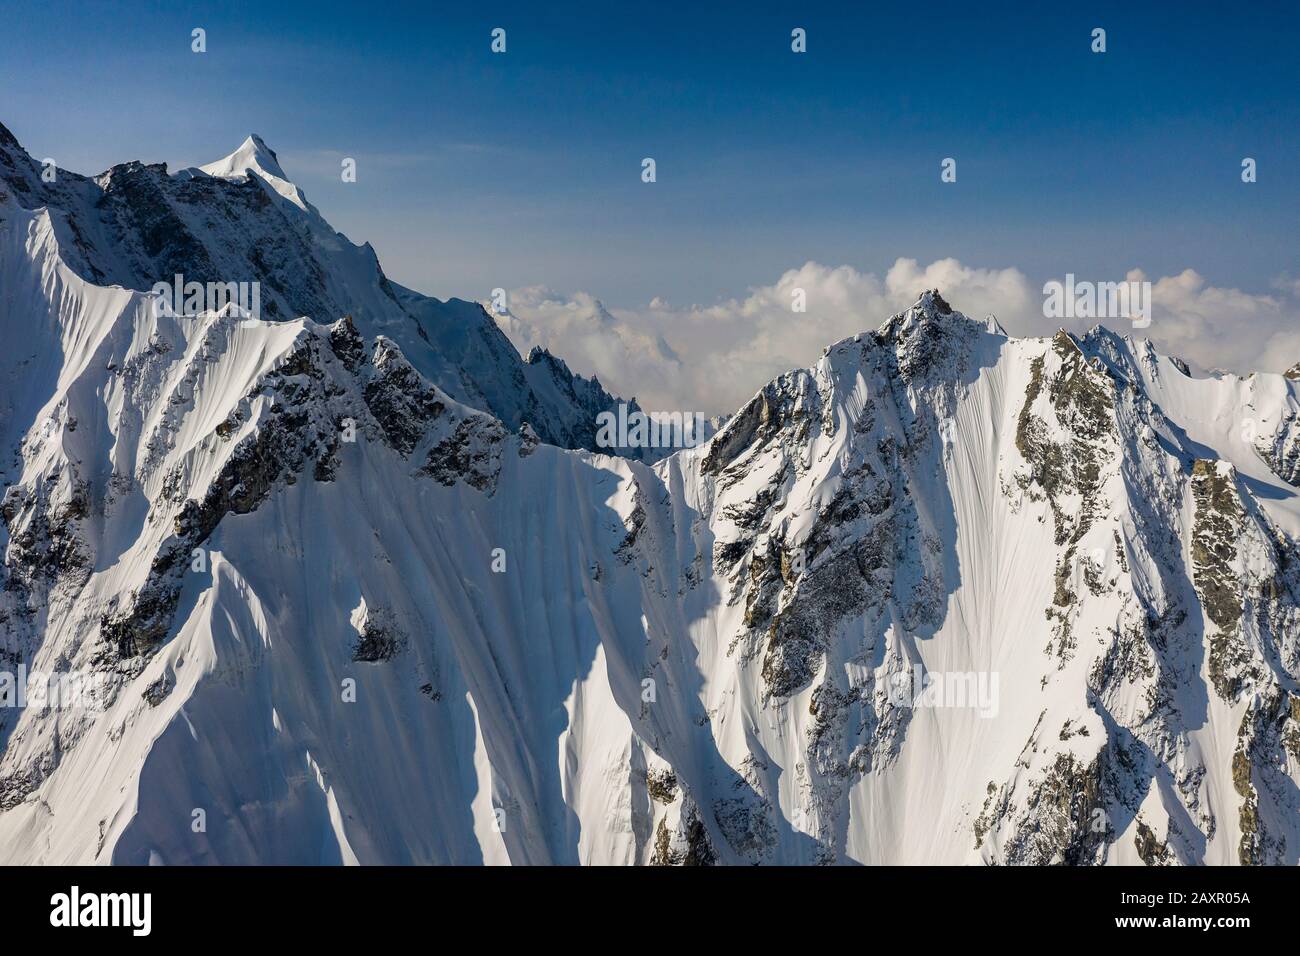 Steep snow covered alpine mountain landscape in the Nepal Himalaya Stock Photo